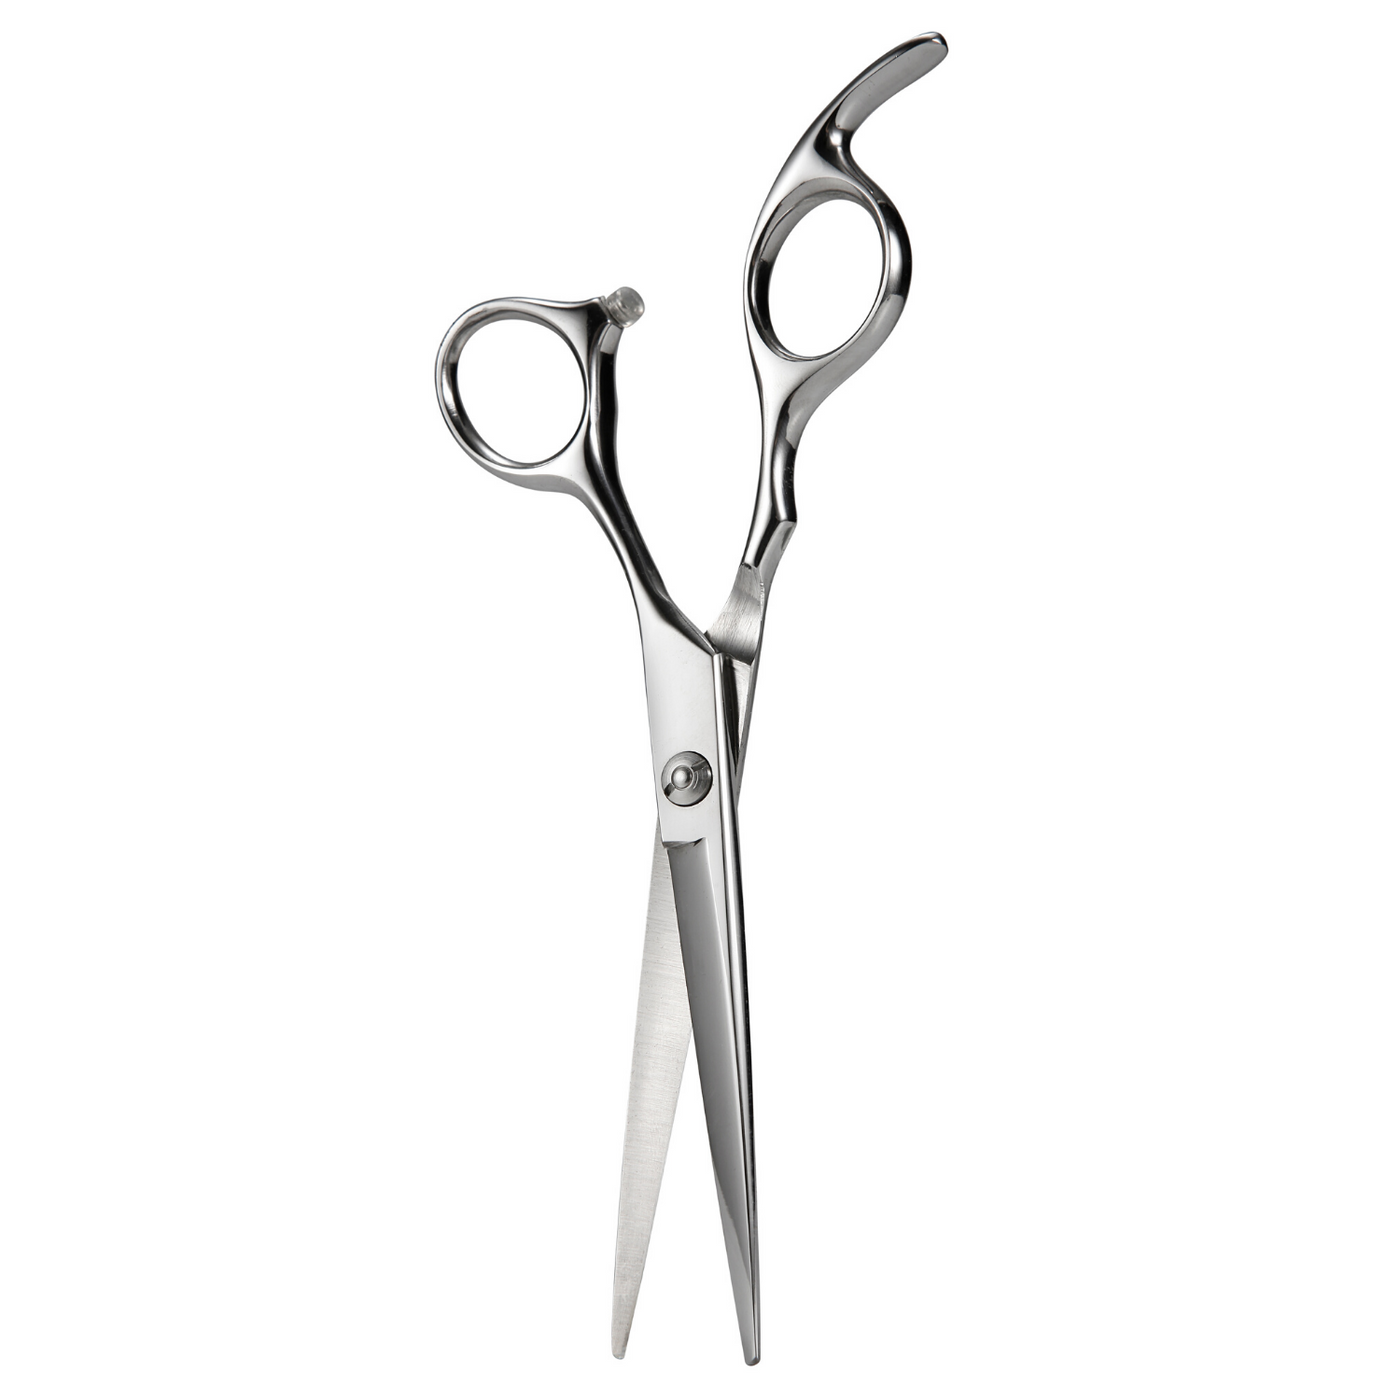  Stainless Steel Scissors by Naked Armor sold by Naked Armor Razors